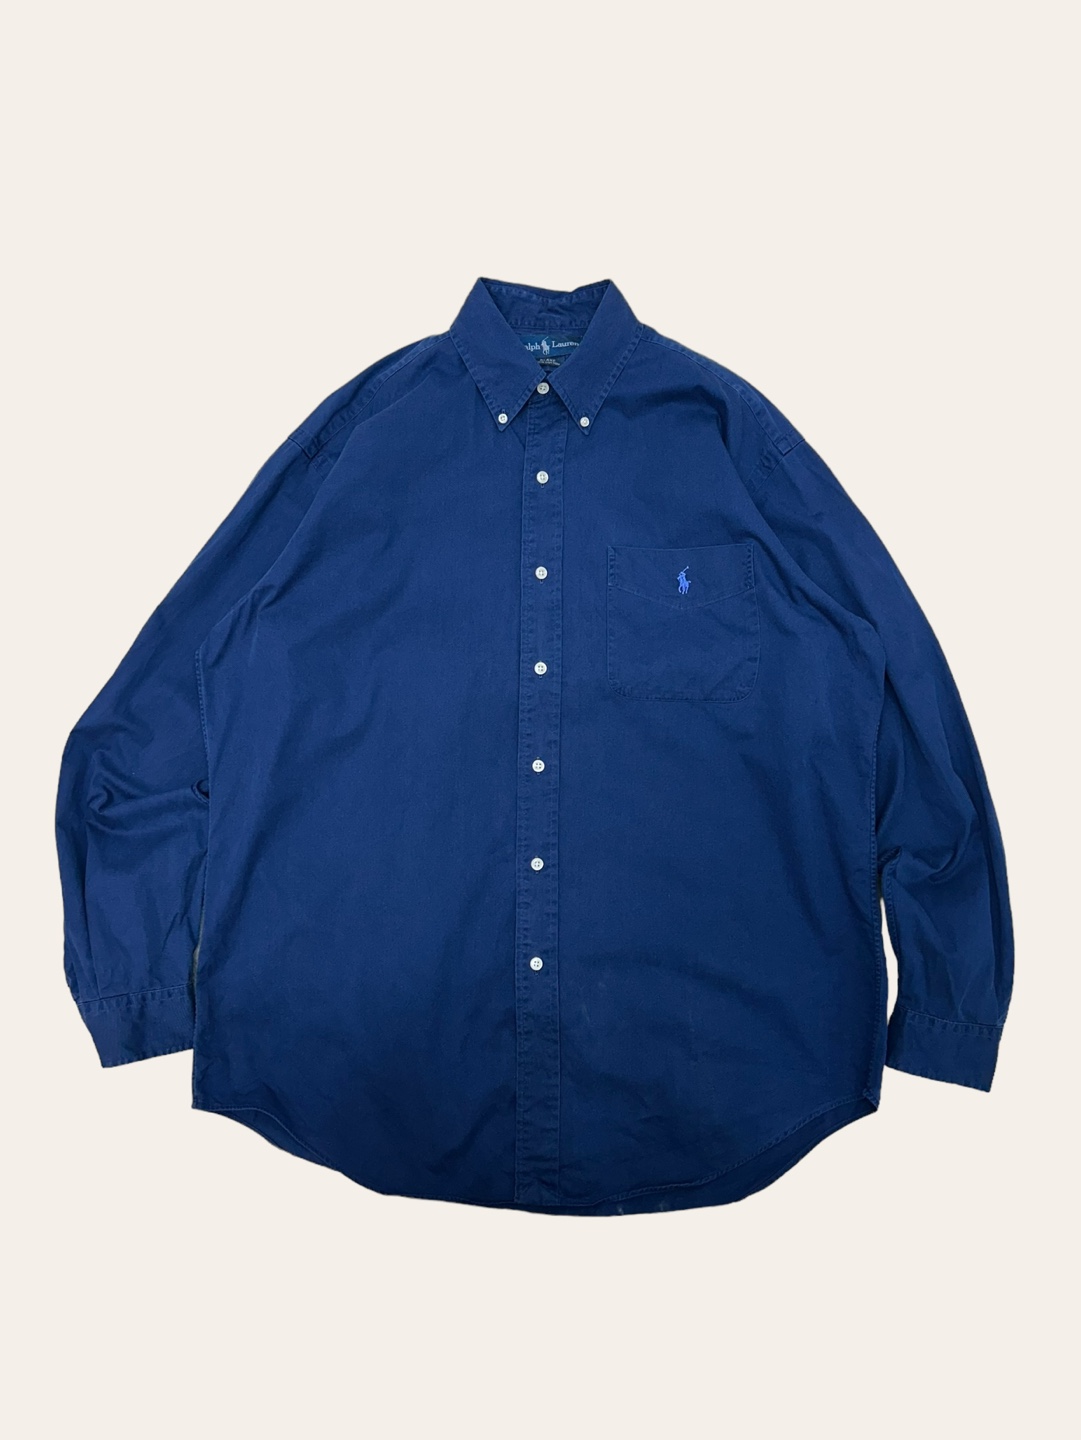 (From USA)Polo ralph lauren navy pocket solid shirt M